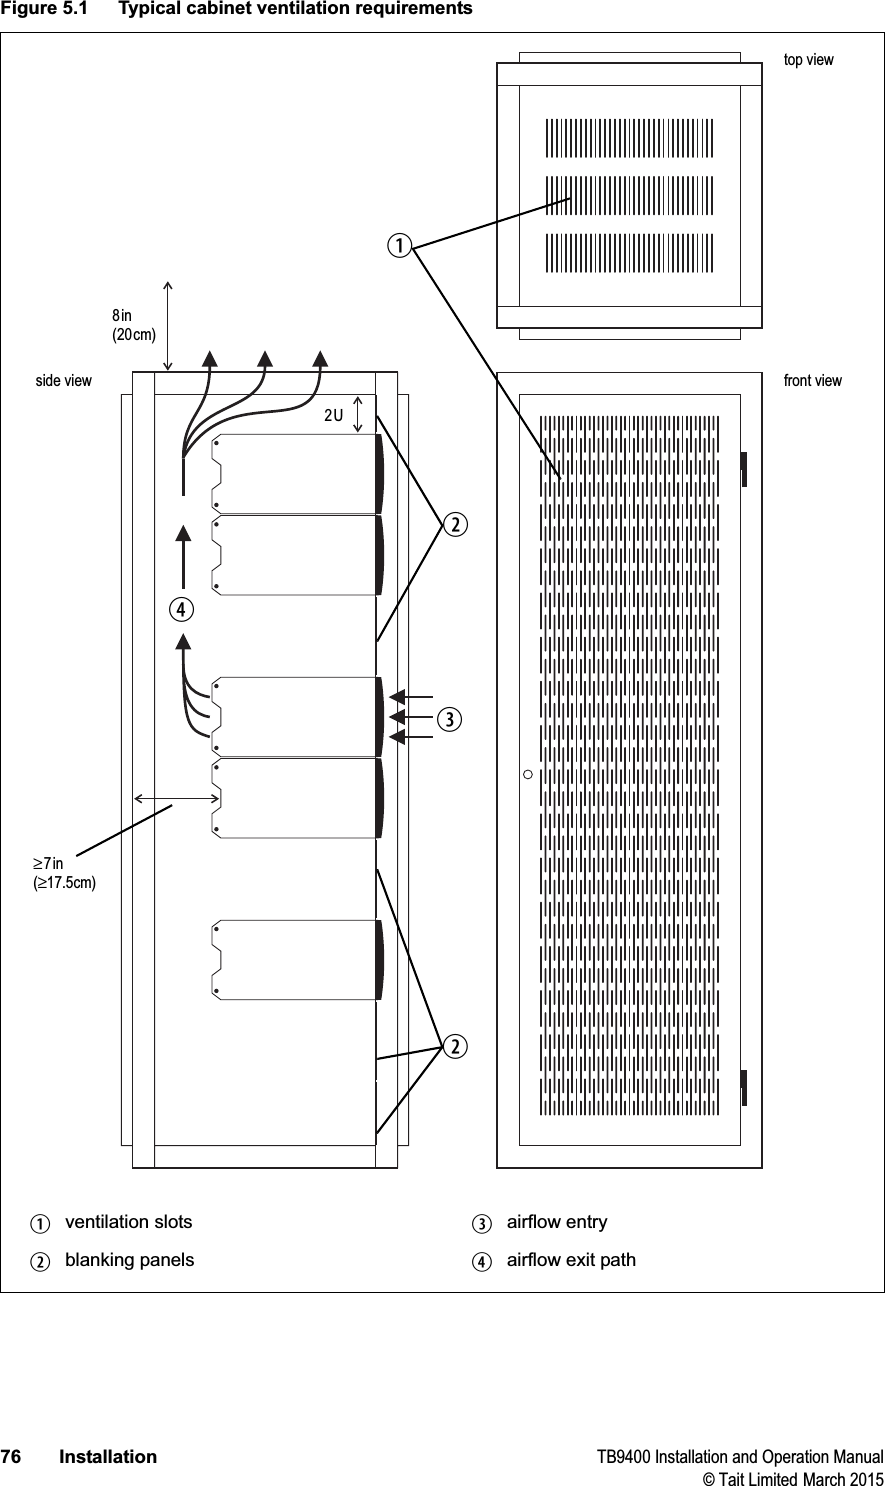 76 Installation TB9400 Installation and Operation Manual© Tait Limited March 2015Figure 5.1 Typical cabinet ventilation requirementsbventilation slots dairflow entrycblanking panels eairflow exit path8in(20cm)2U≥7in(≥17.5cm)side view front viewtop viewccdeb